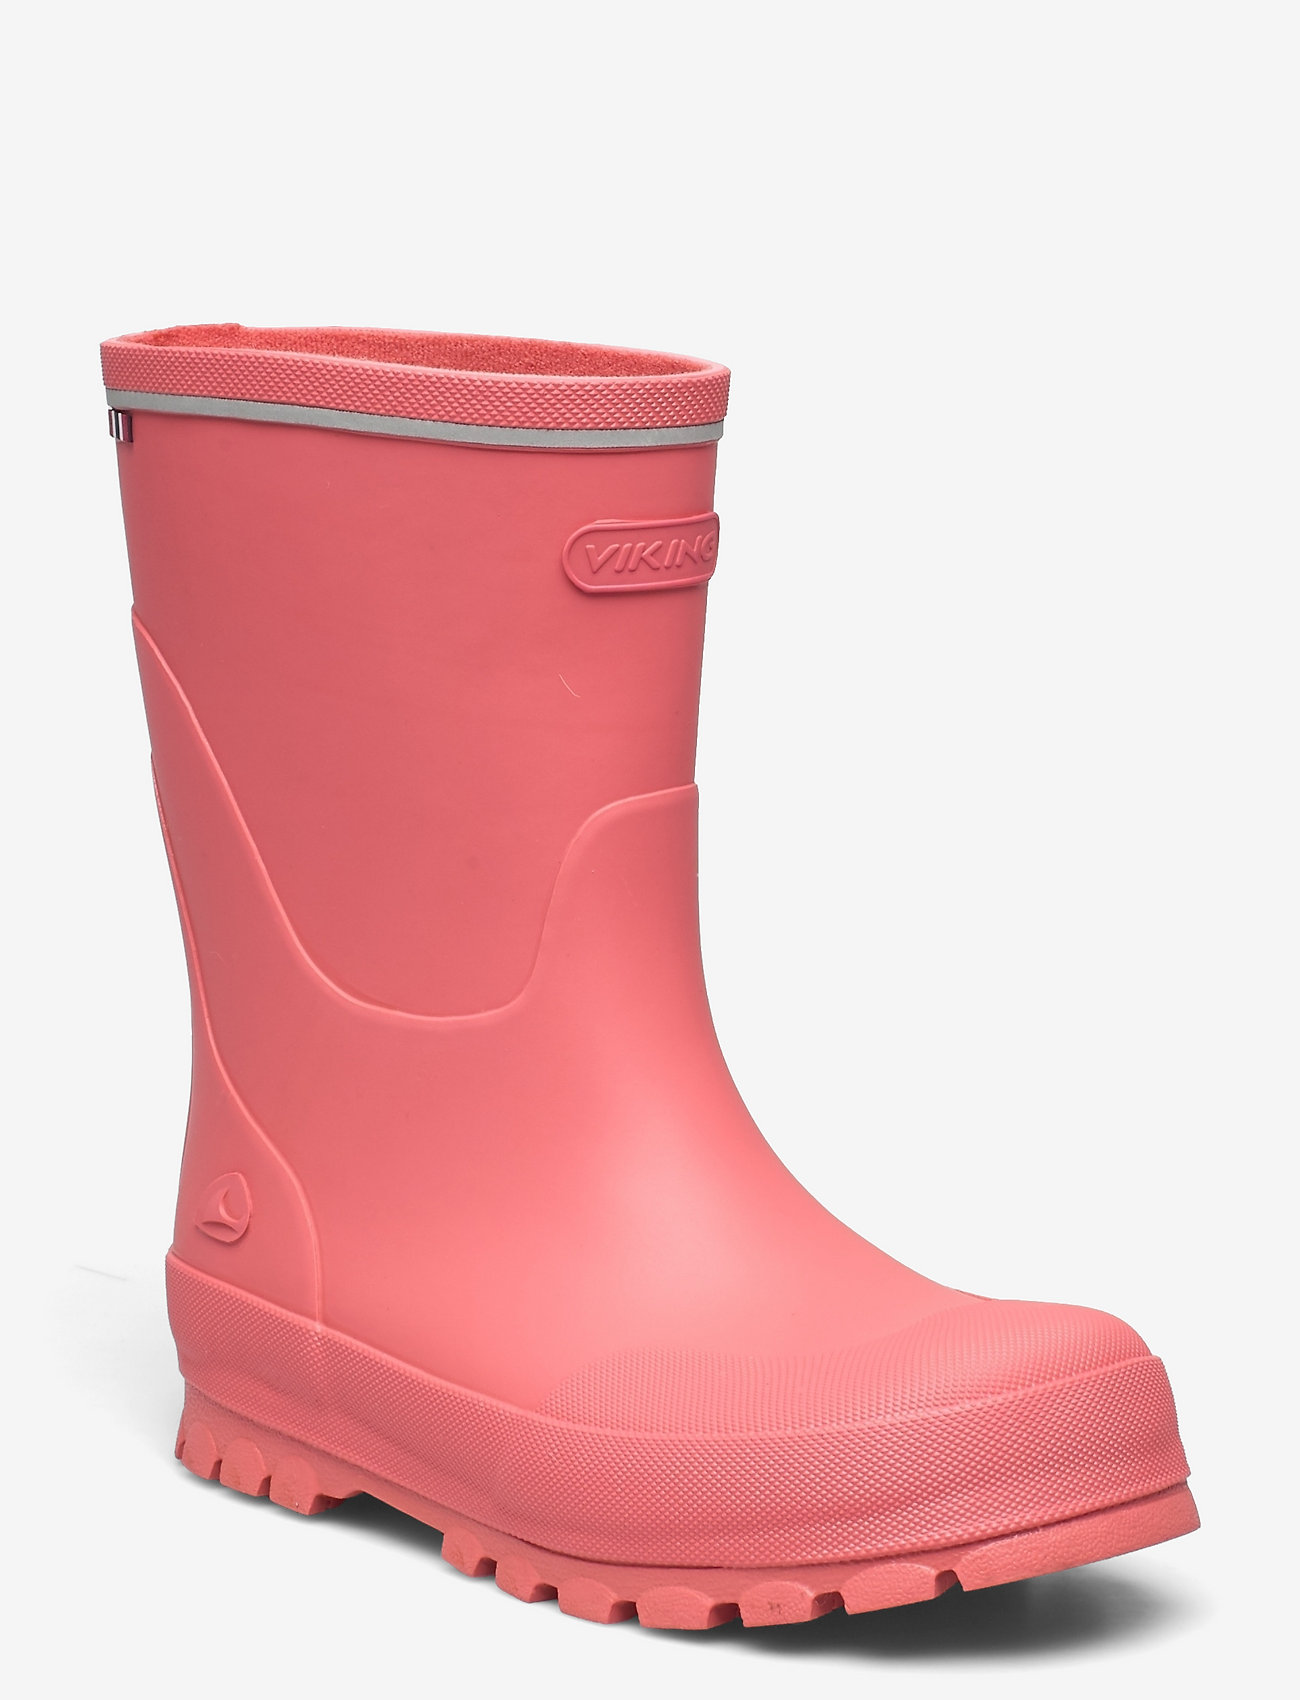 Viking - Jolly - unlined rubberboots - pink/pink - 0